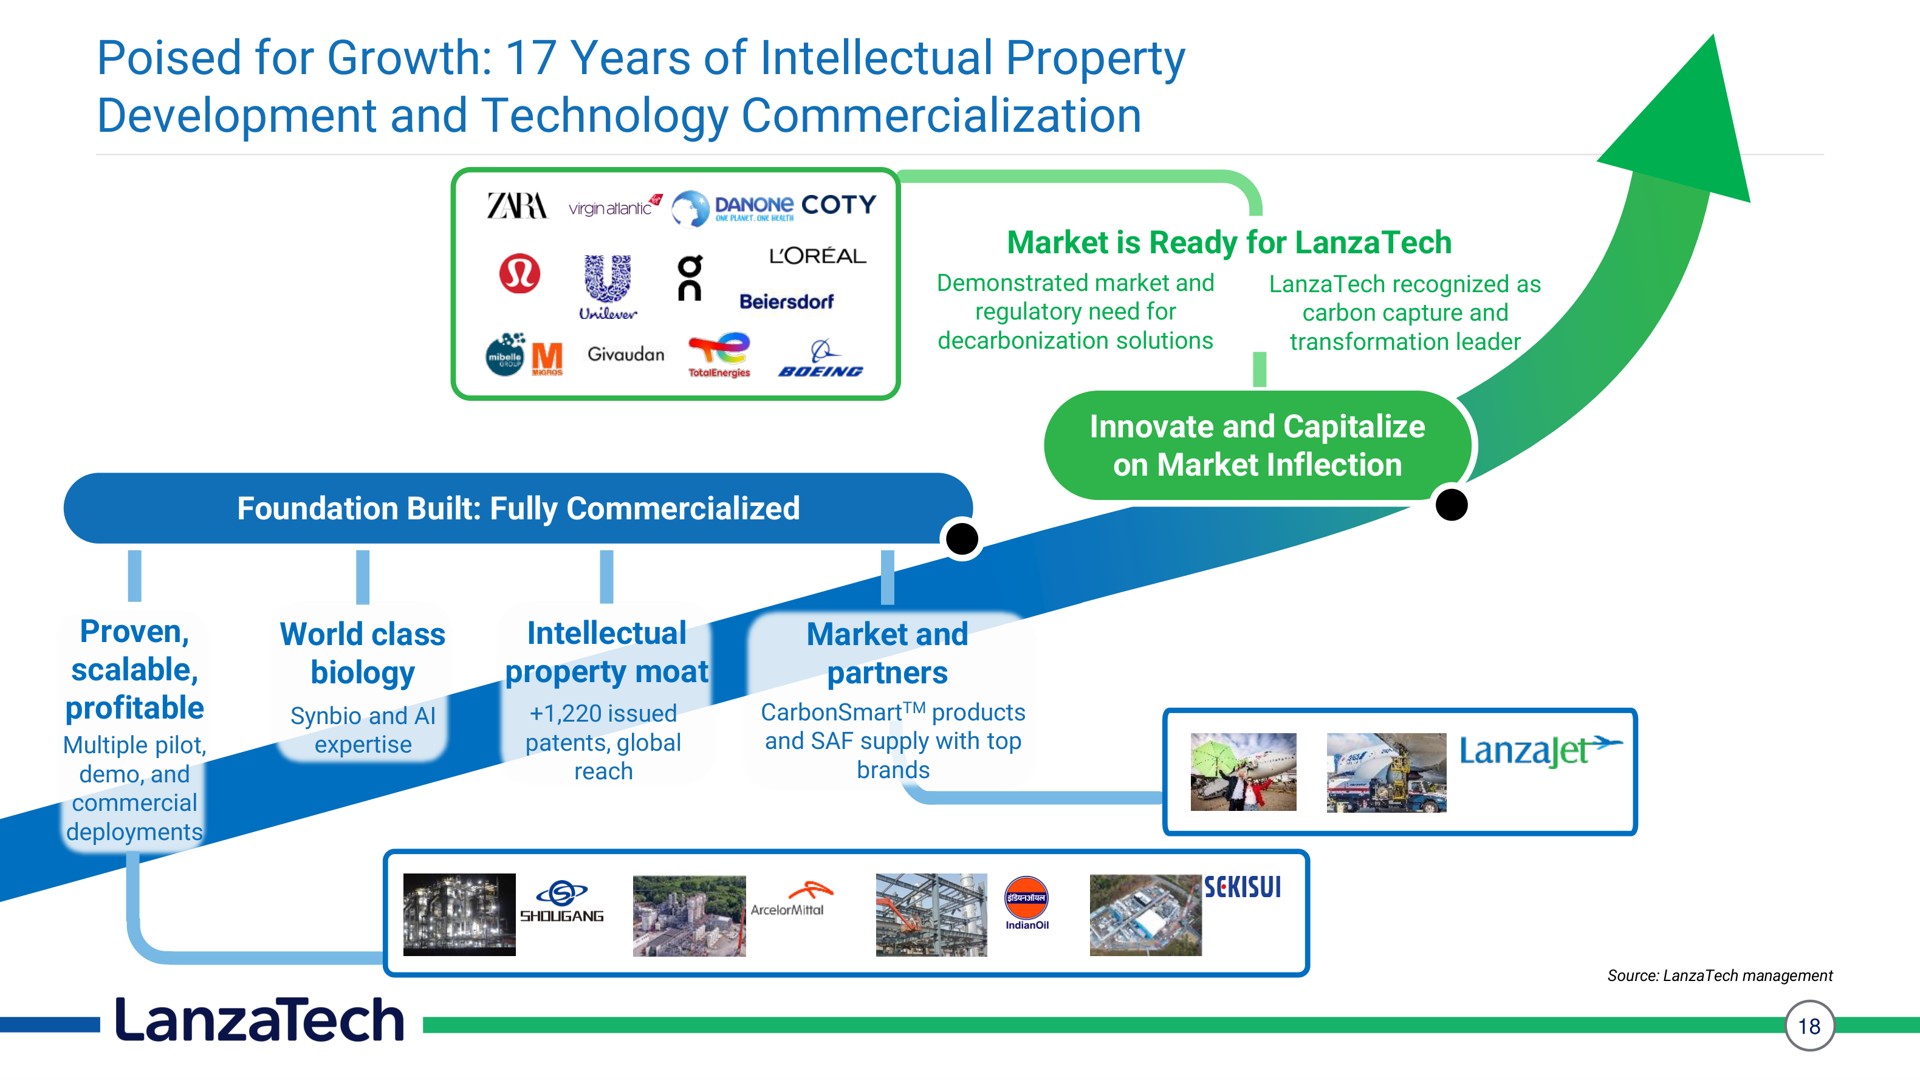 poised for growth years of intellectual property development and technology commercialization | LanzaTech